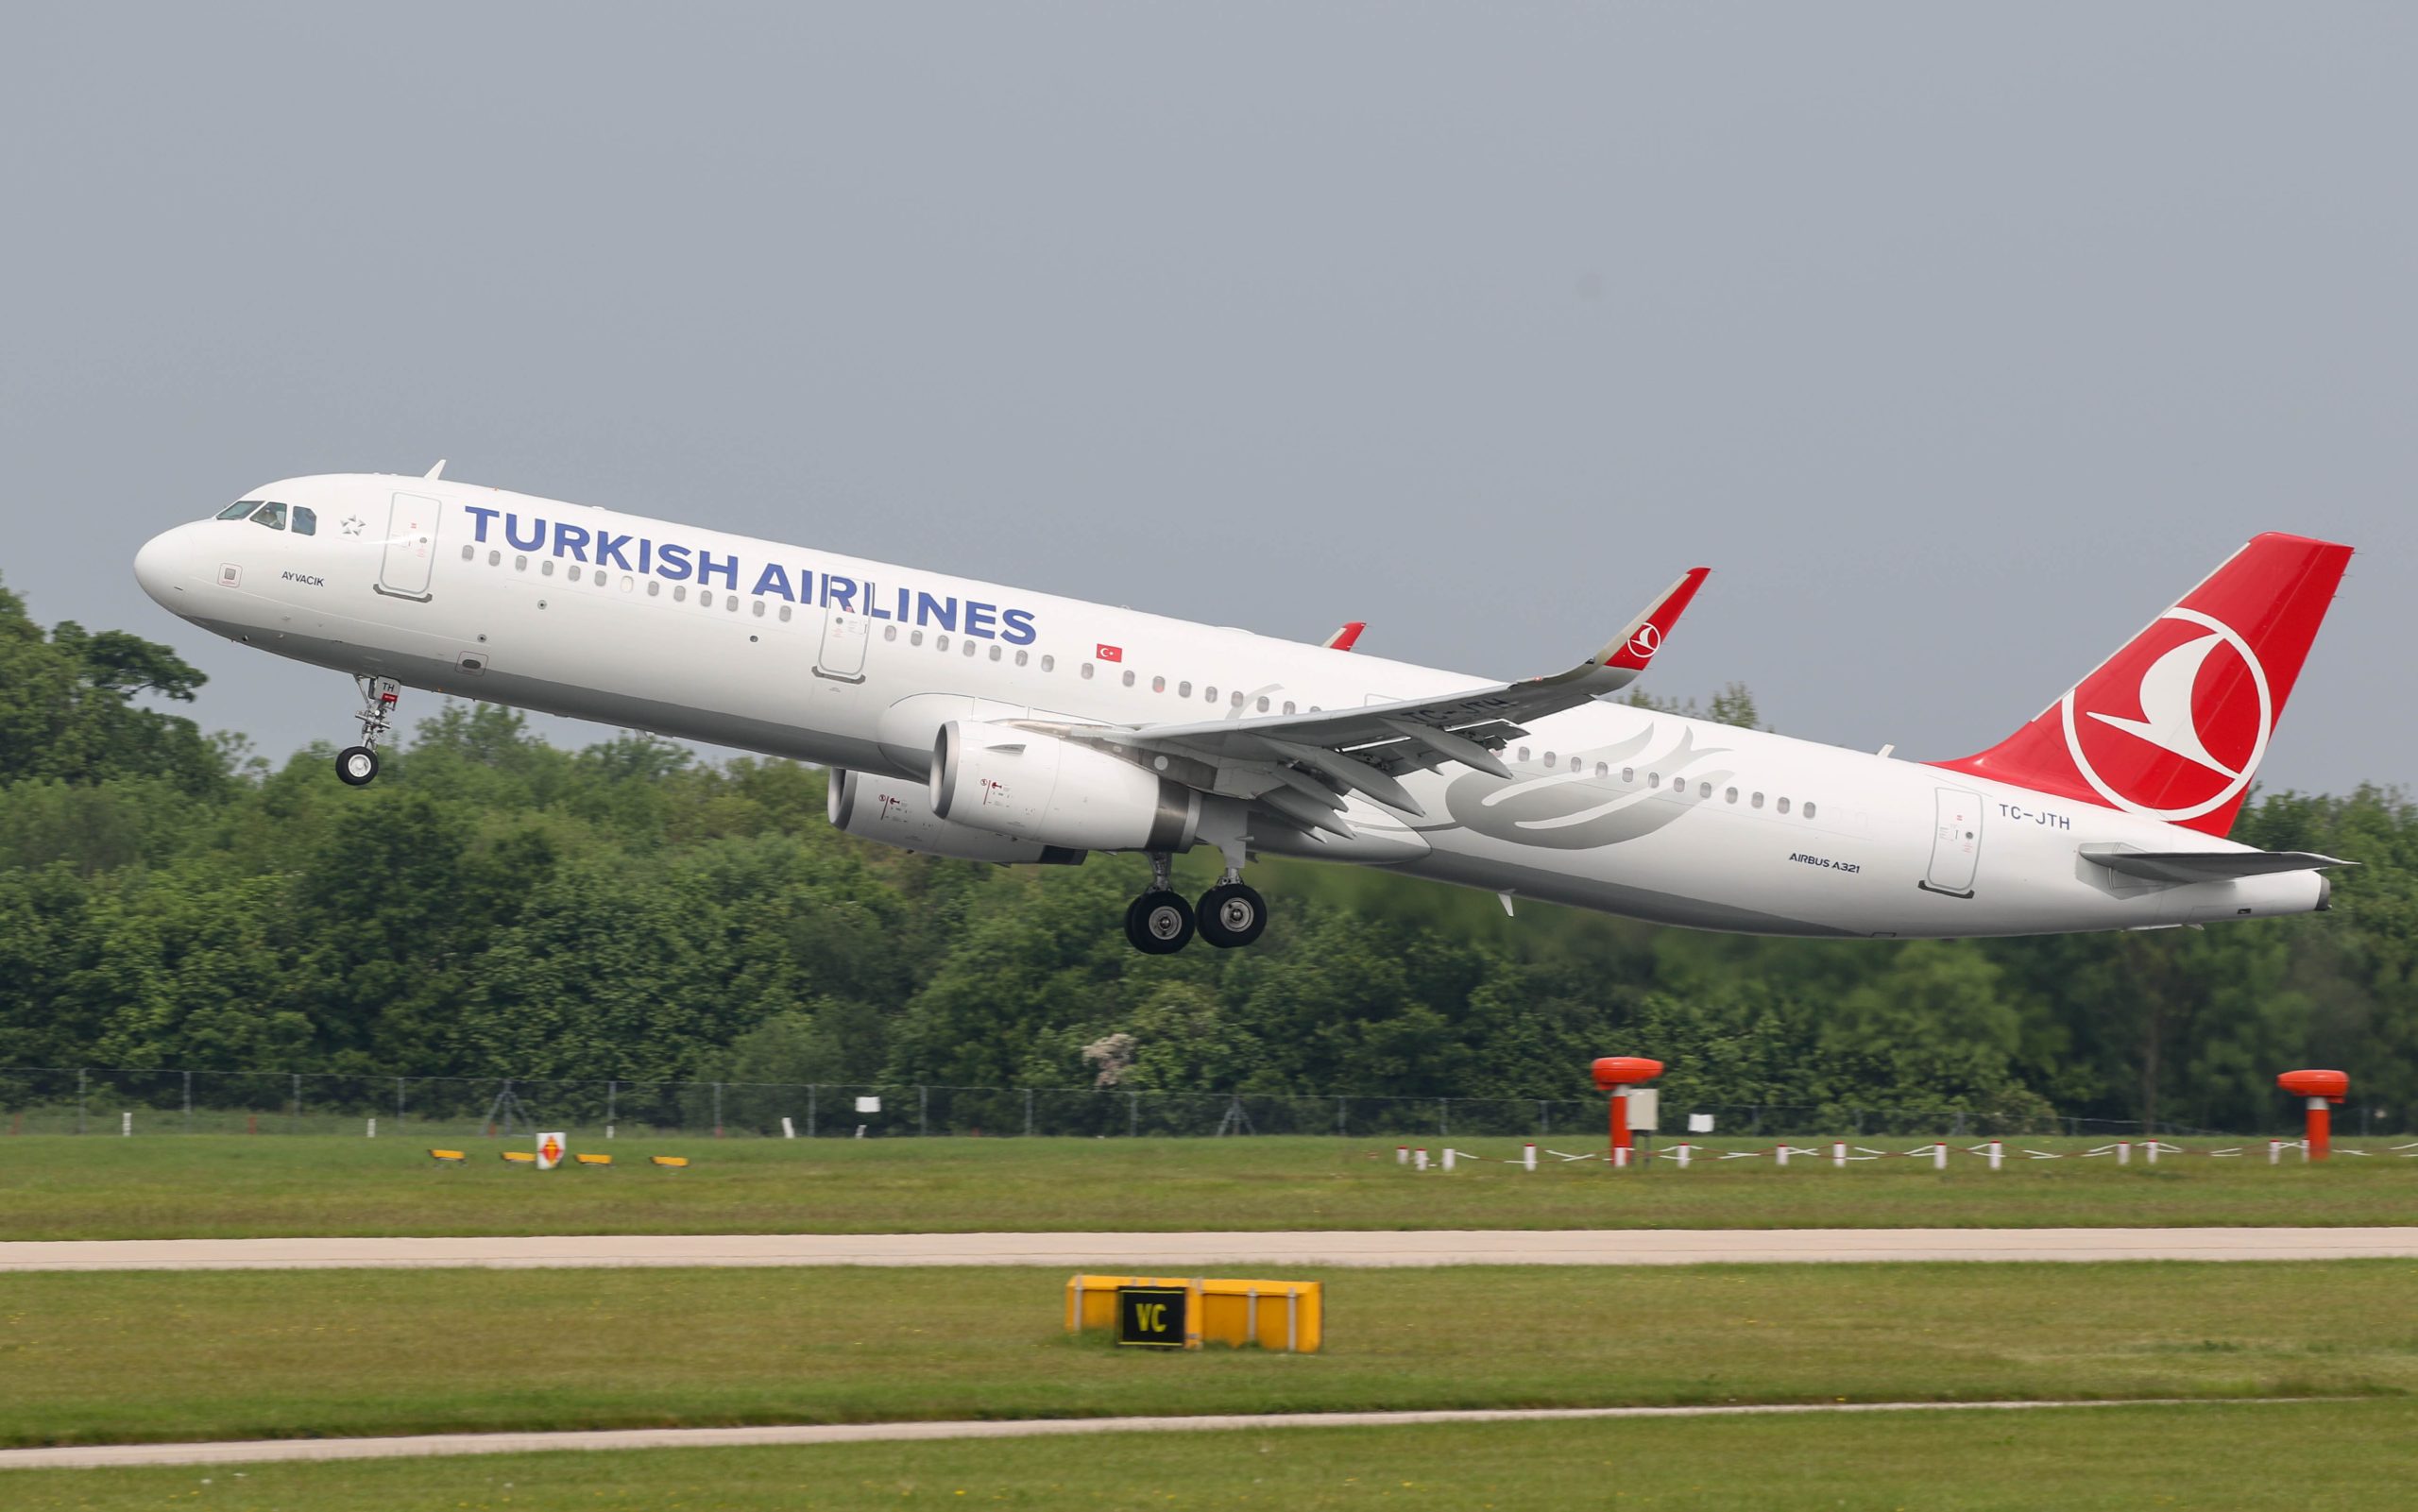 Turkish Airlines A321 taking Off. Photo by Russell Lee